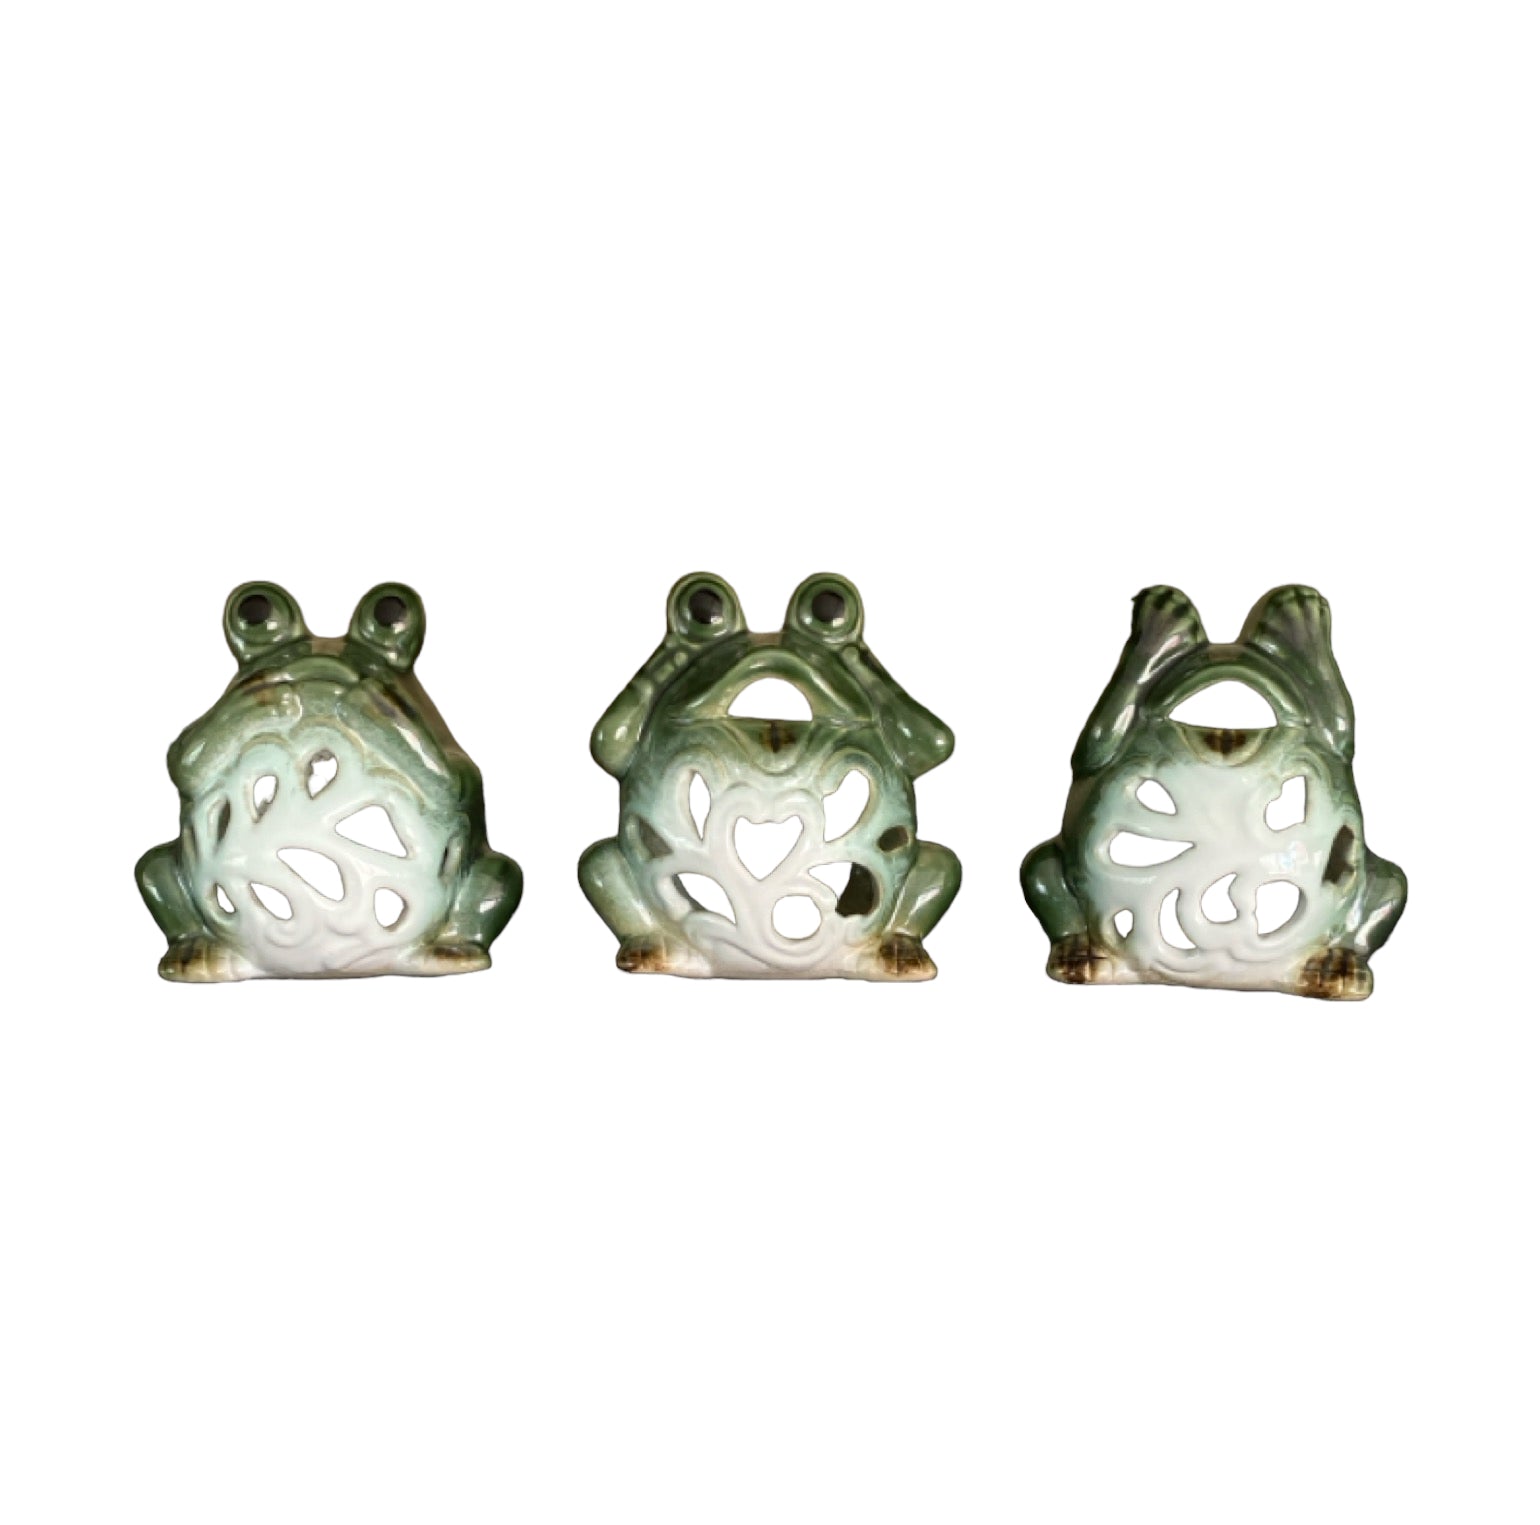 Frog Set of 3 Candle Holder - The Renmy Store Homewares & Gifts 